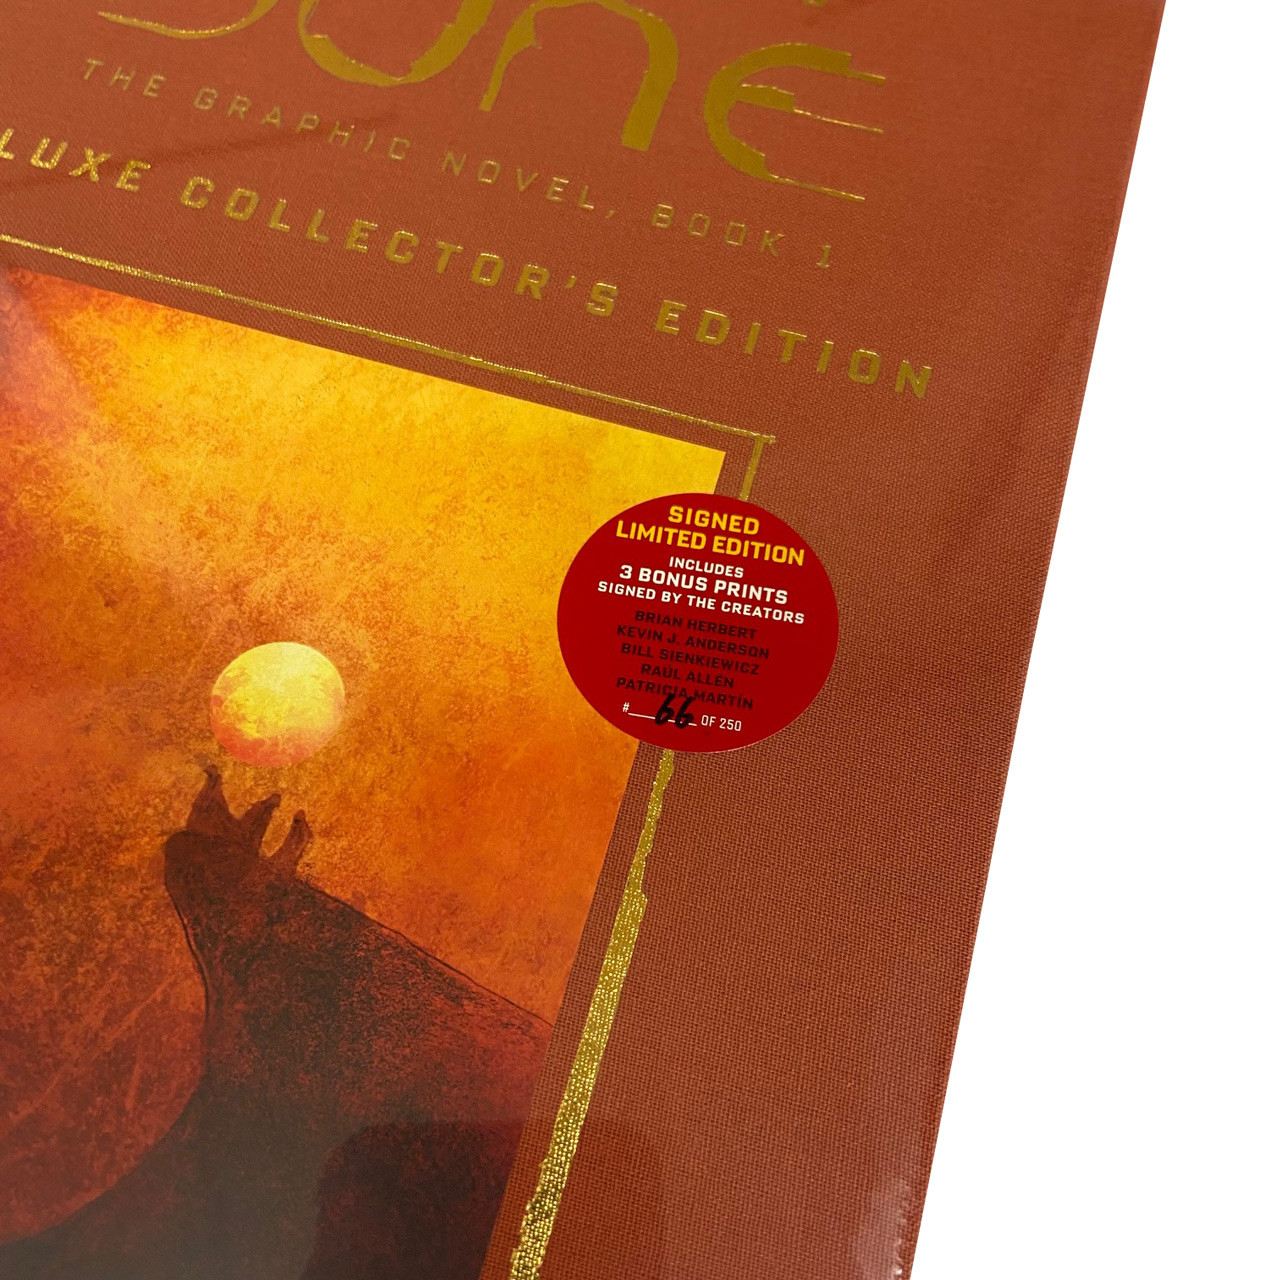 Frank Herbert "Dune" Signed Limited Deluxe Collector's Edition No. 65 of 250,  Three Bonus Signed Prints, Slipcased [Sealed]